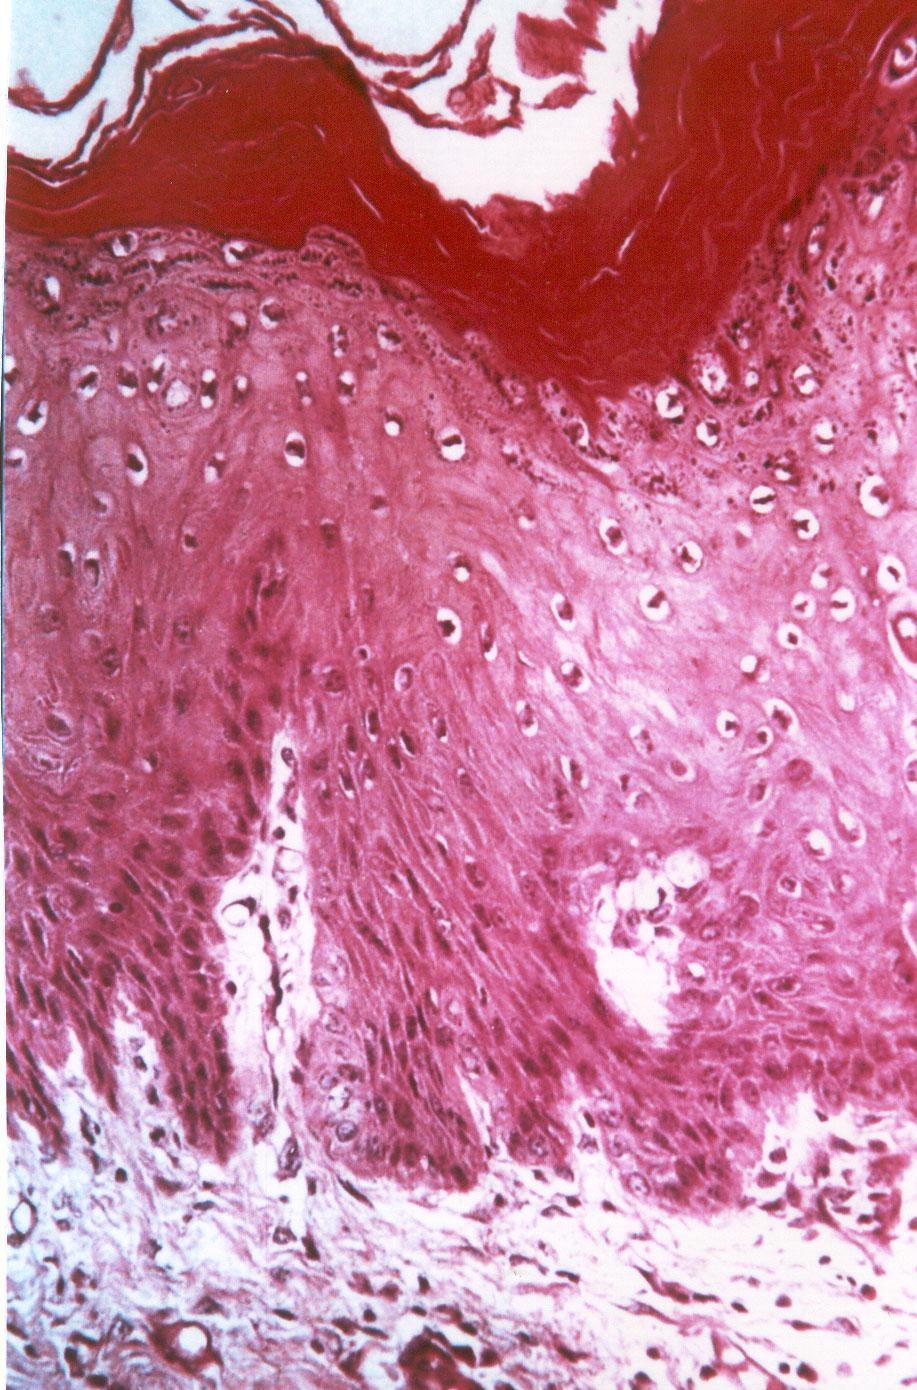 Squamous cell papilloma